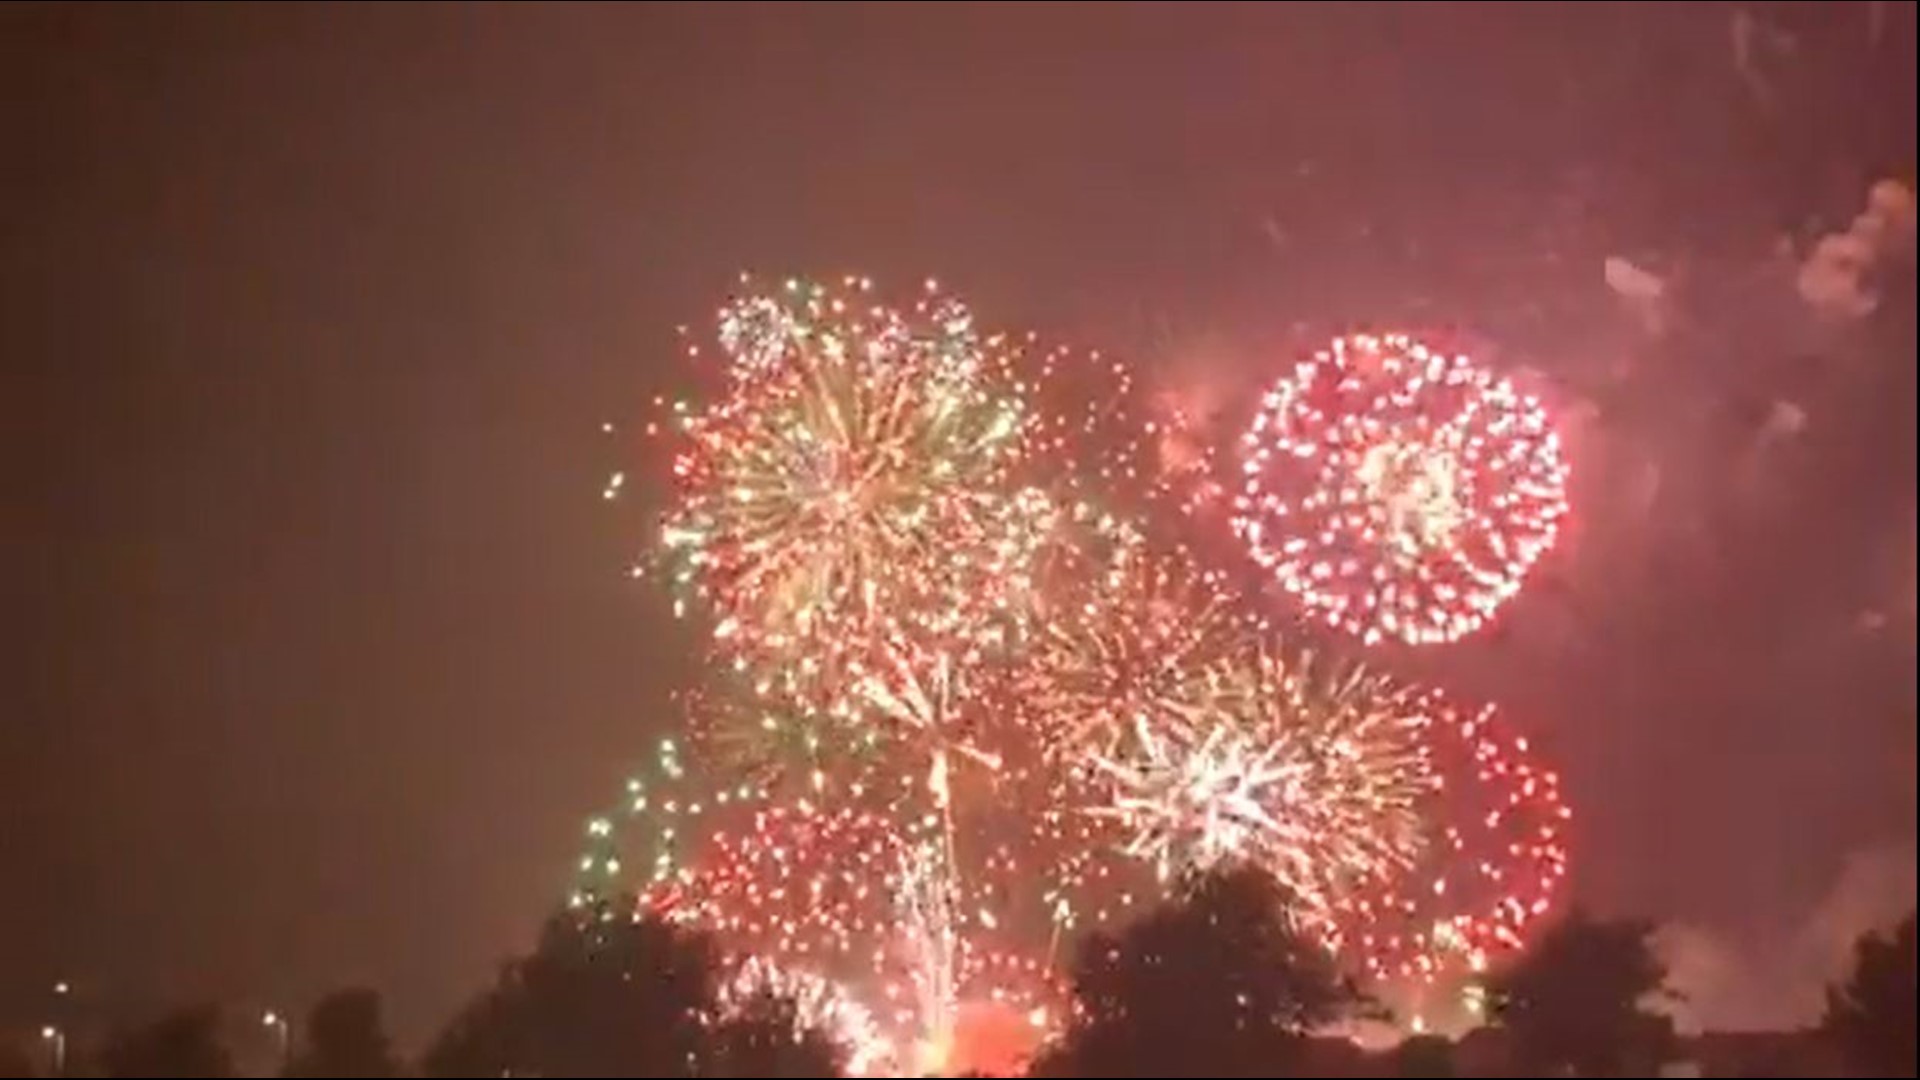 According to the City, a malfunction about 10 minutes into the City's firework show at Plum Creek Golf Course caused multiple fireworks to light at the same time. (Video credit: Lauren Aleman)